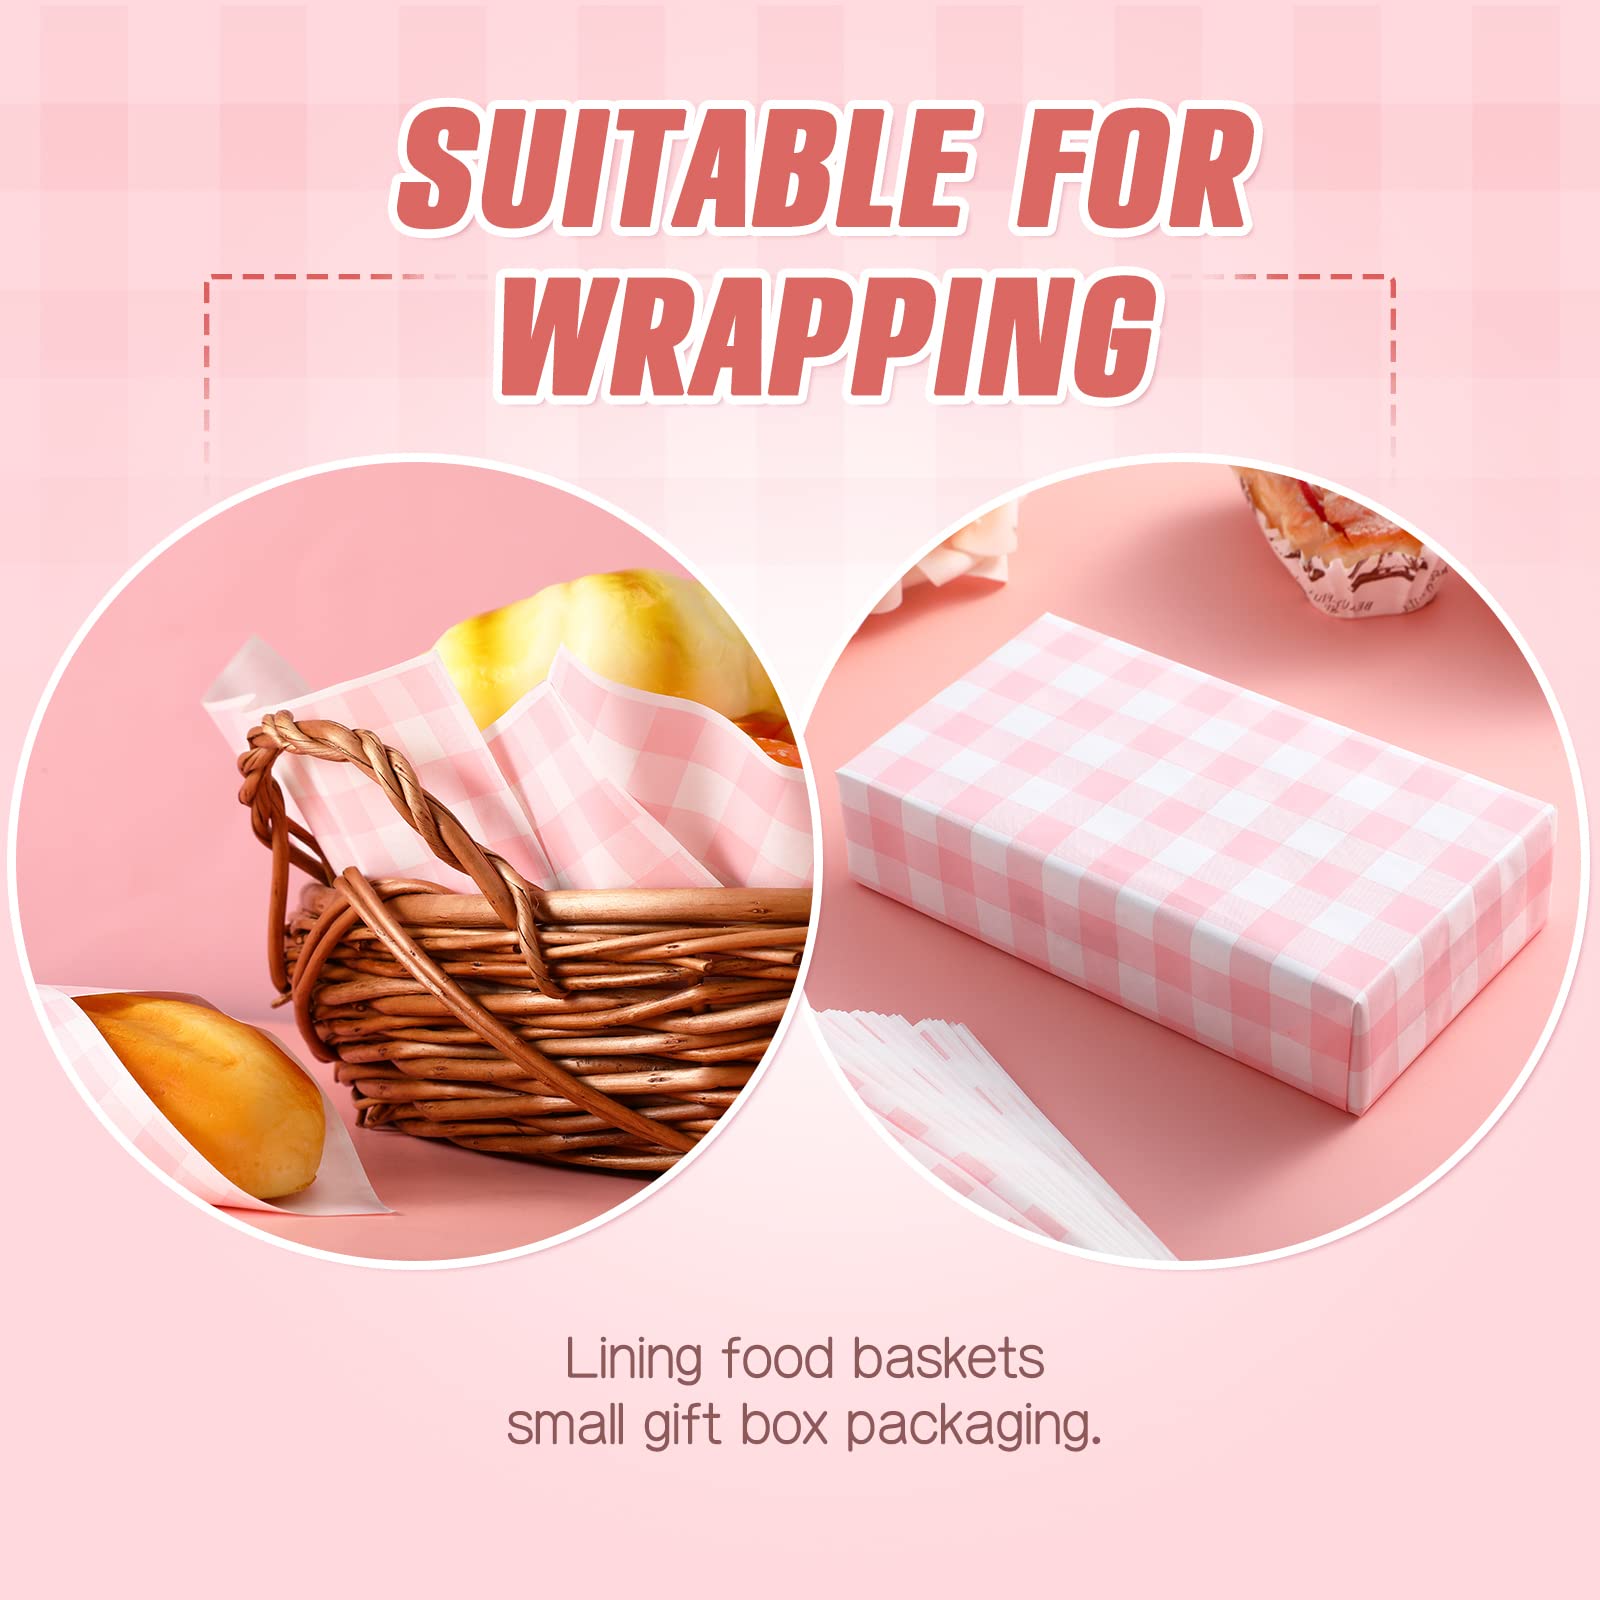 150 Pcs Wax Paper Sheets for Food Deli Papers Pink Checkered Sandwiches Paper Greaseproof Disposable Wrapping Paper for Sandwich Picnic Basket Liner Easter Birthday Baby Shower Party Supplies